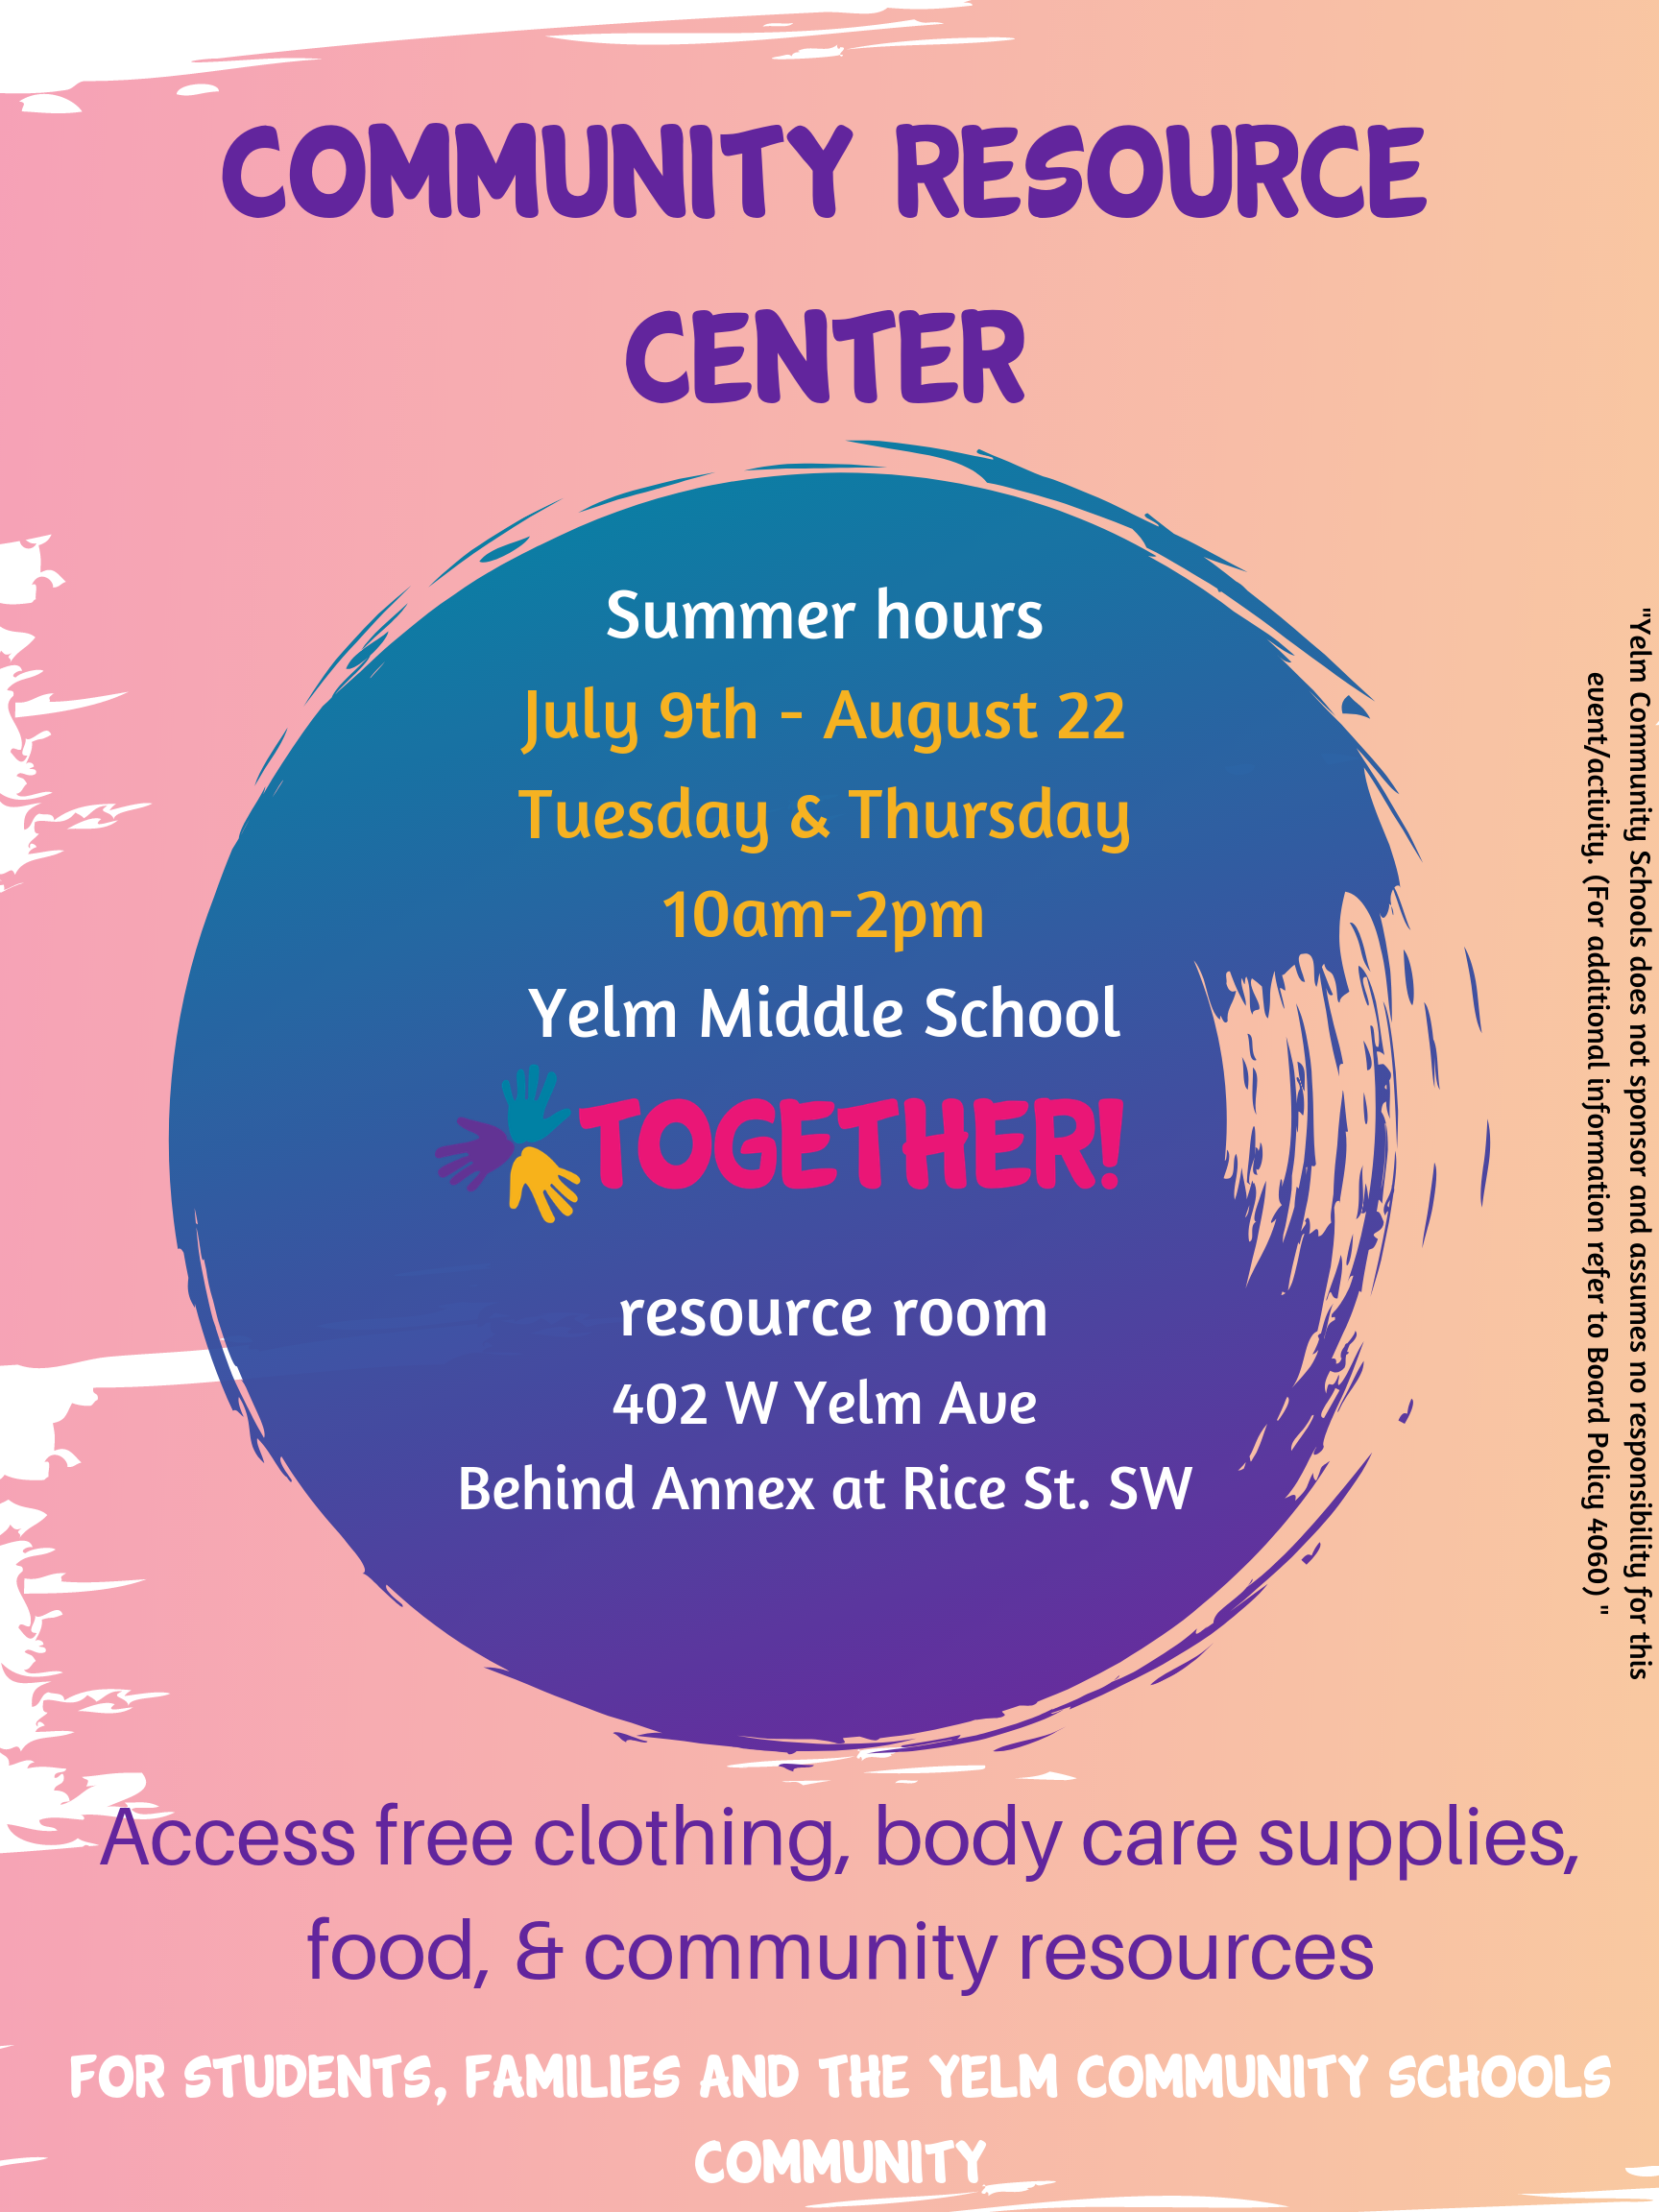 Access free clothing, body care supplies, food, & community resources